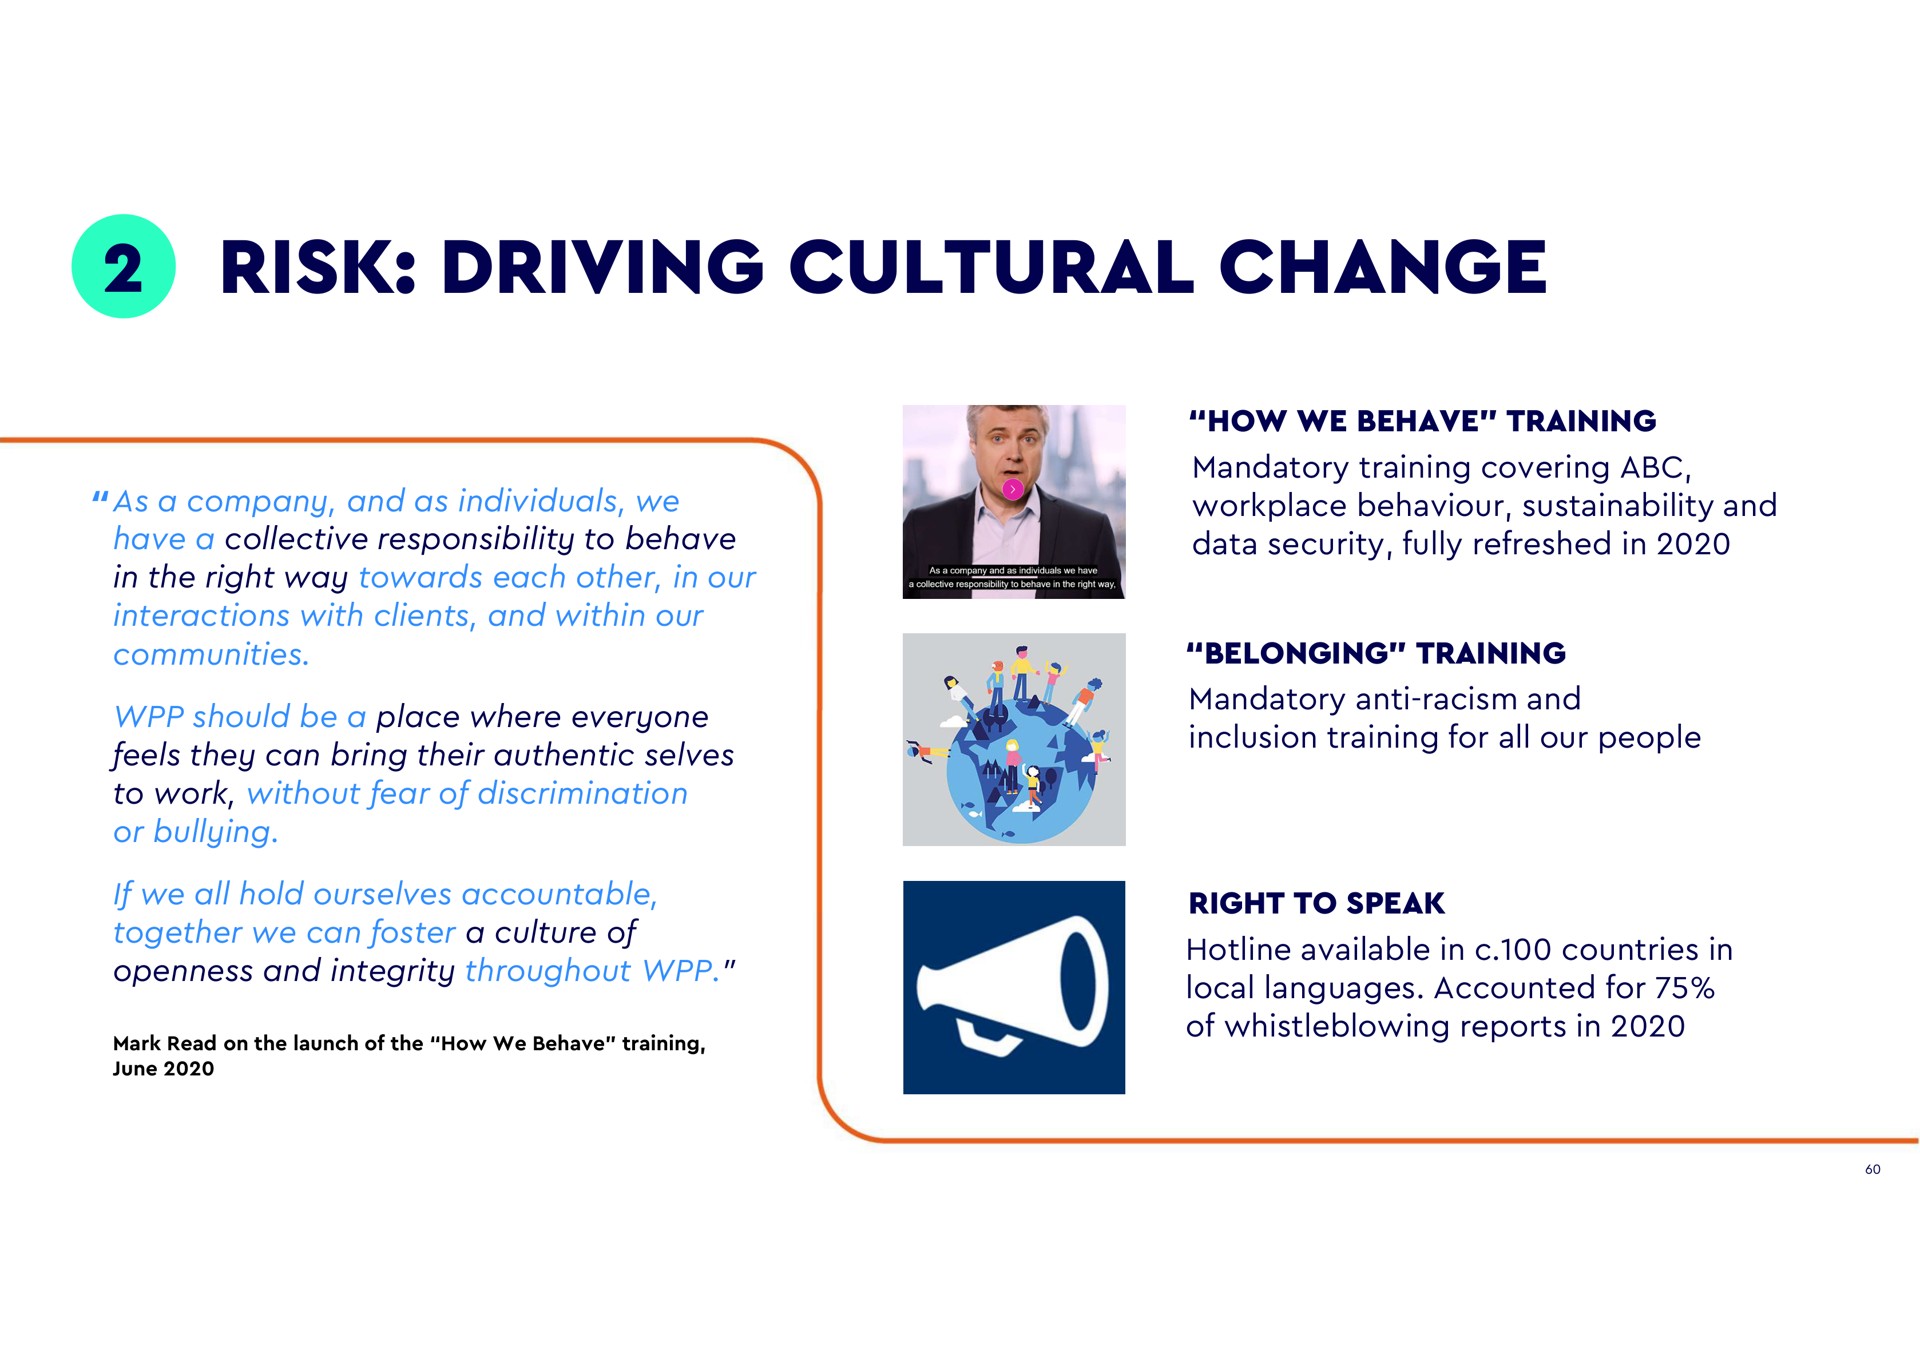 risk driving cultural change as and as individuals we have a collective responsibility to behave in the right way towards each other in our interactions with clients and within our communities should be a place where everyone feels they can bring their authentic selves to work without fear of discrimination or bullying if we all hold ourselves accountable together we can foster a culture of openness and integrity throughout mark read on the launch of the how we behave training june how we behave training mandatory training covering workplace behaviour and data security fully refreshed in belonging training mandatory anti racism and inclusion training for all our people right to speak available in countries in local languages accounted for of reports in | WPP